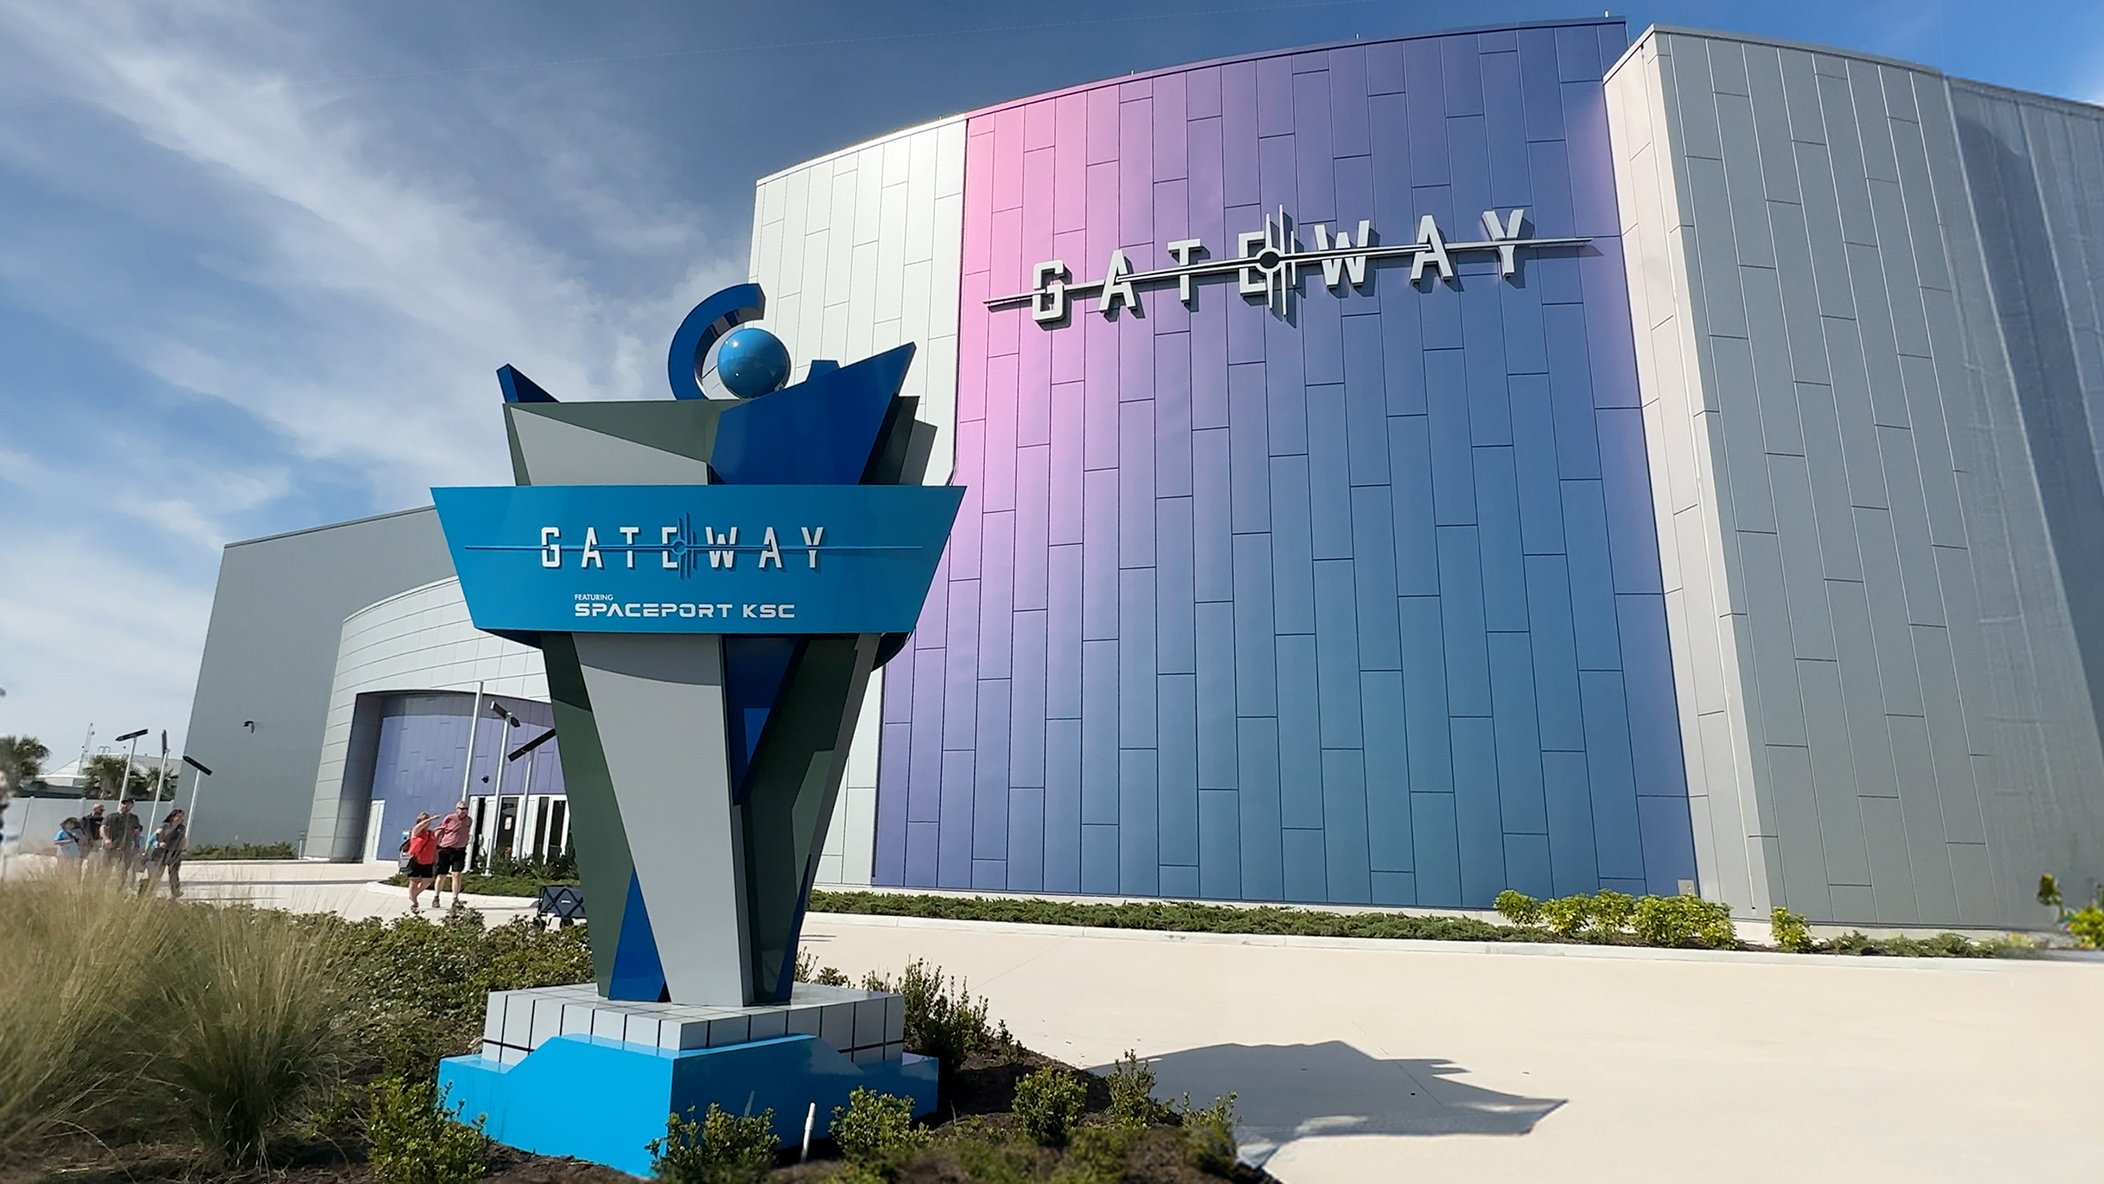    The entrance to the Kennedy Space Center's 'Gateway' complex, where history and future meet.   